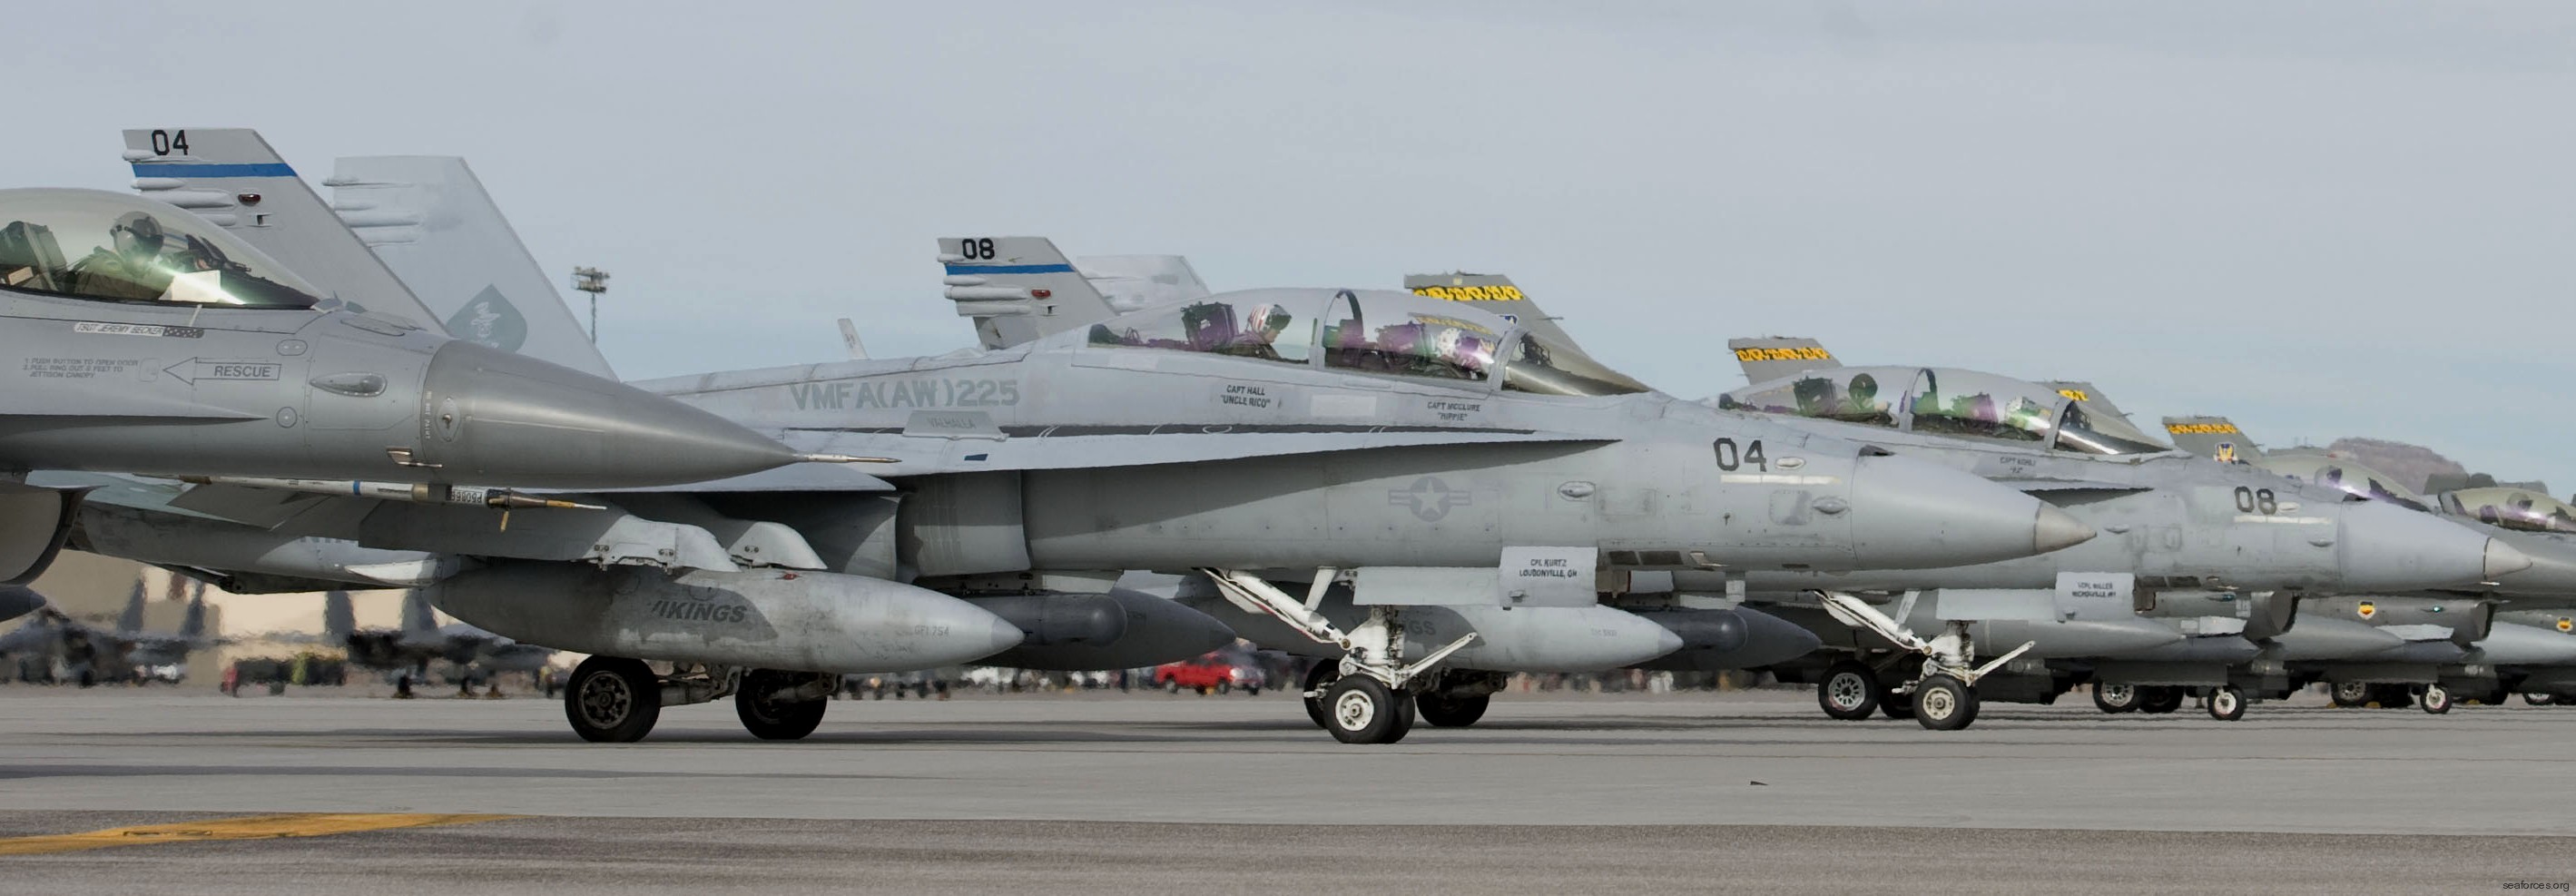 vmfa(aw)-225 vikings marine fighter attack squadron f/a-18d hornet 57 exercise red flag 15-1 nellis afb nevada